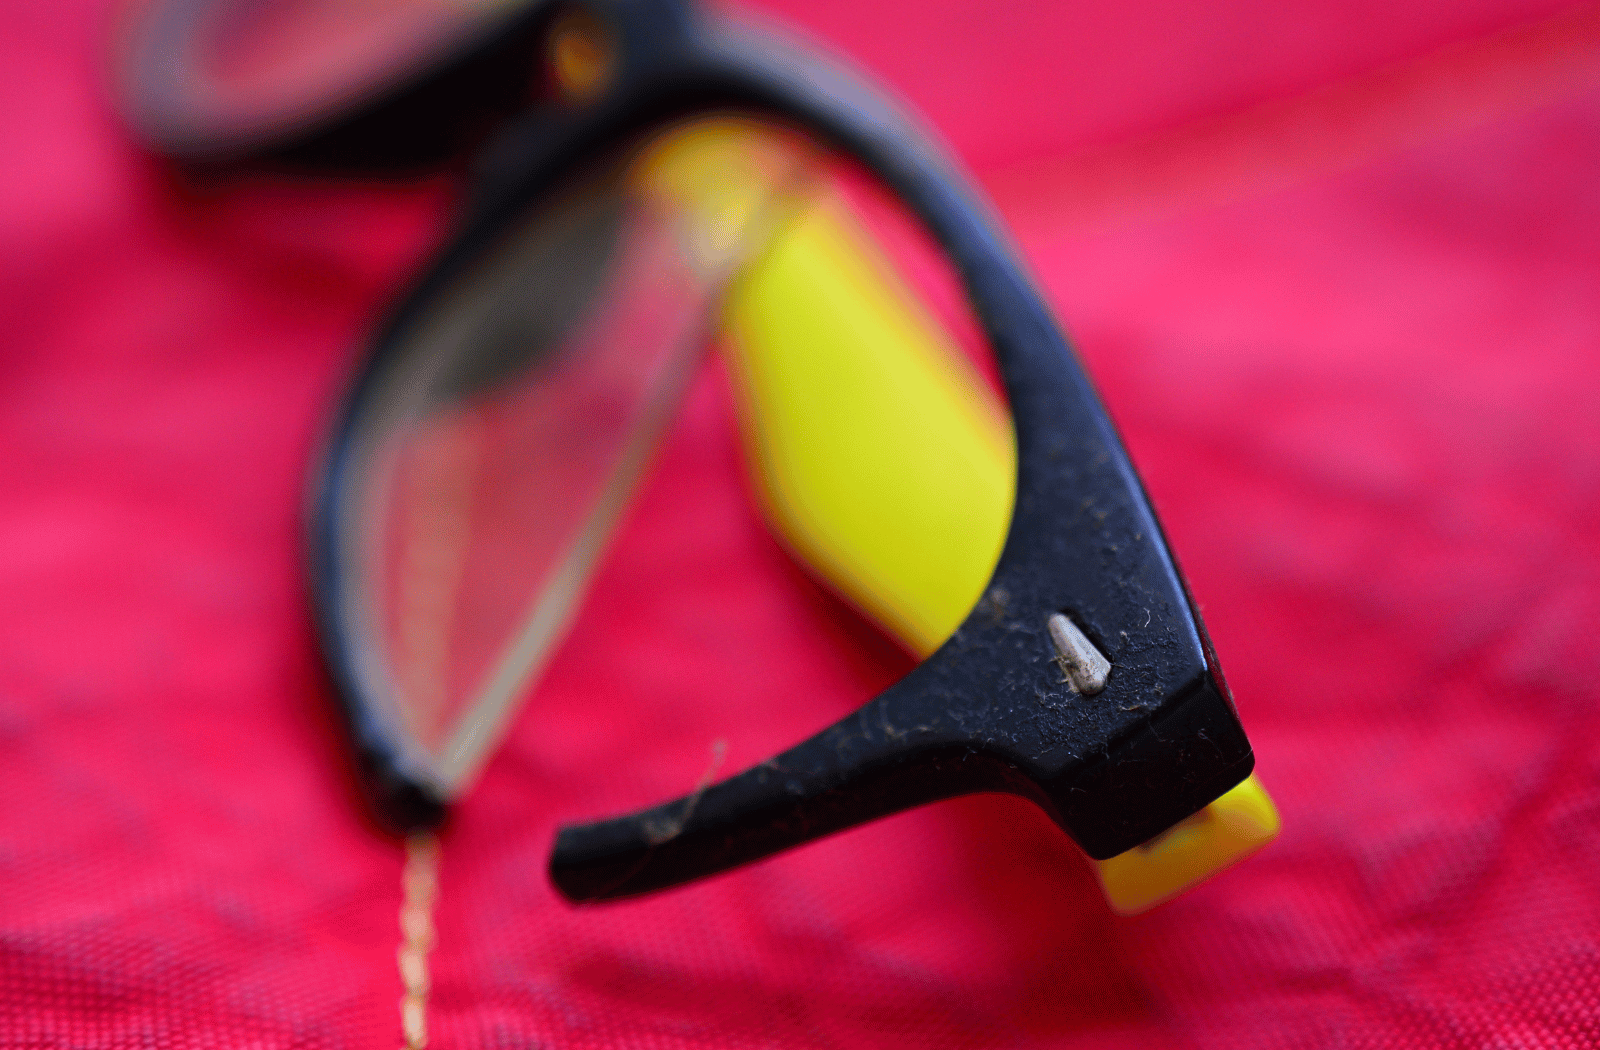 A pair of black and yellow glasses with a broken frame